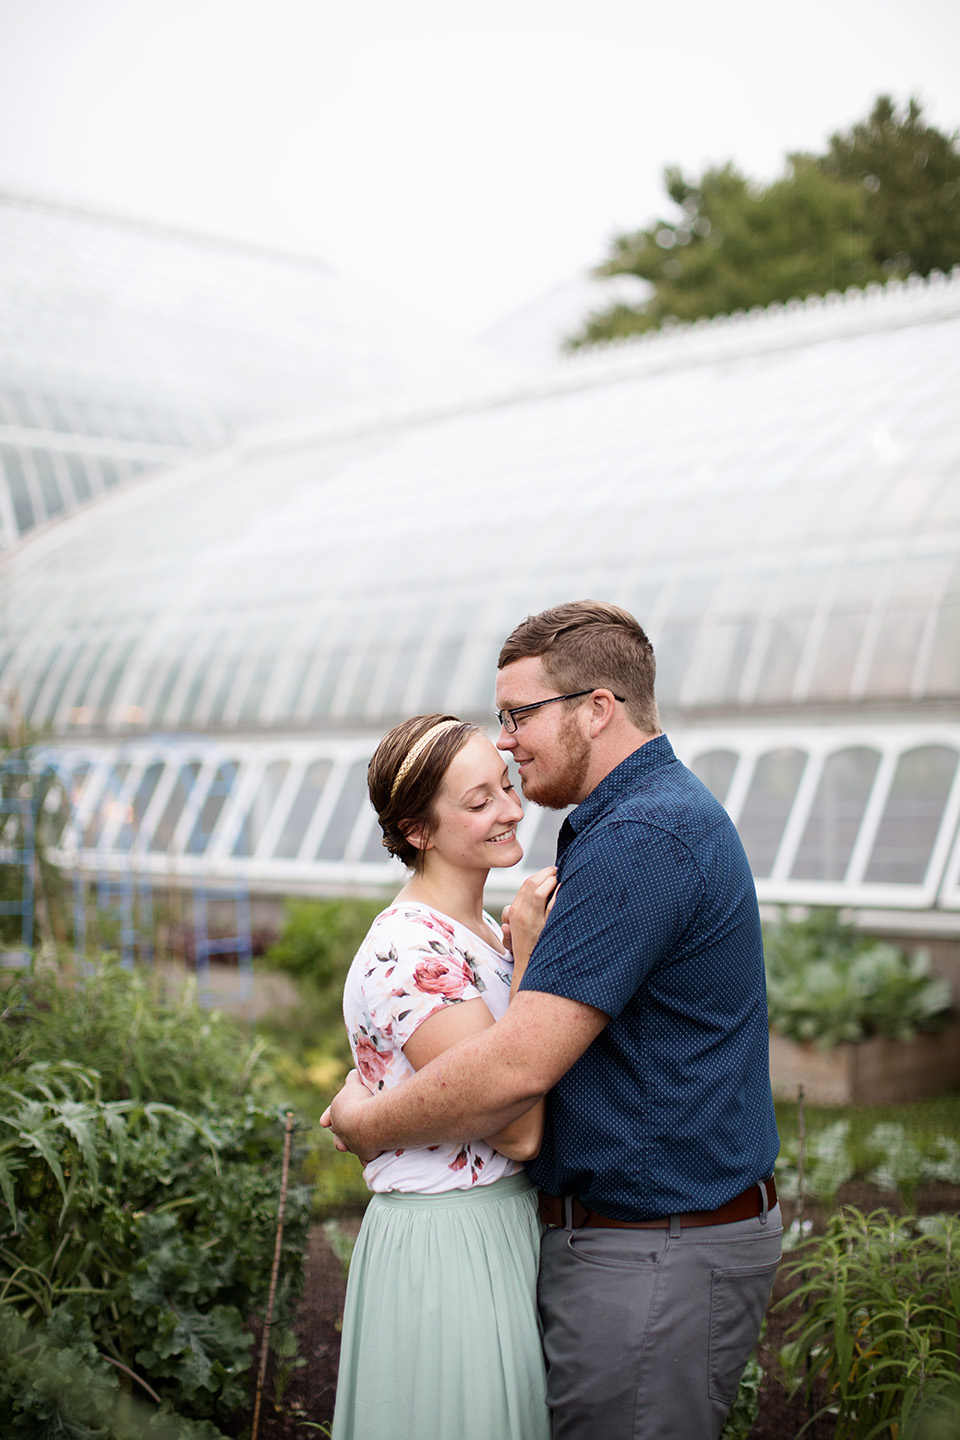 PHIPPS CONSERVATORY ENGAGEMENT PHOTO SESSION-PITTSBURGH, PA-LORENE+DUANE- 12